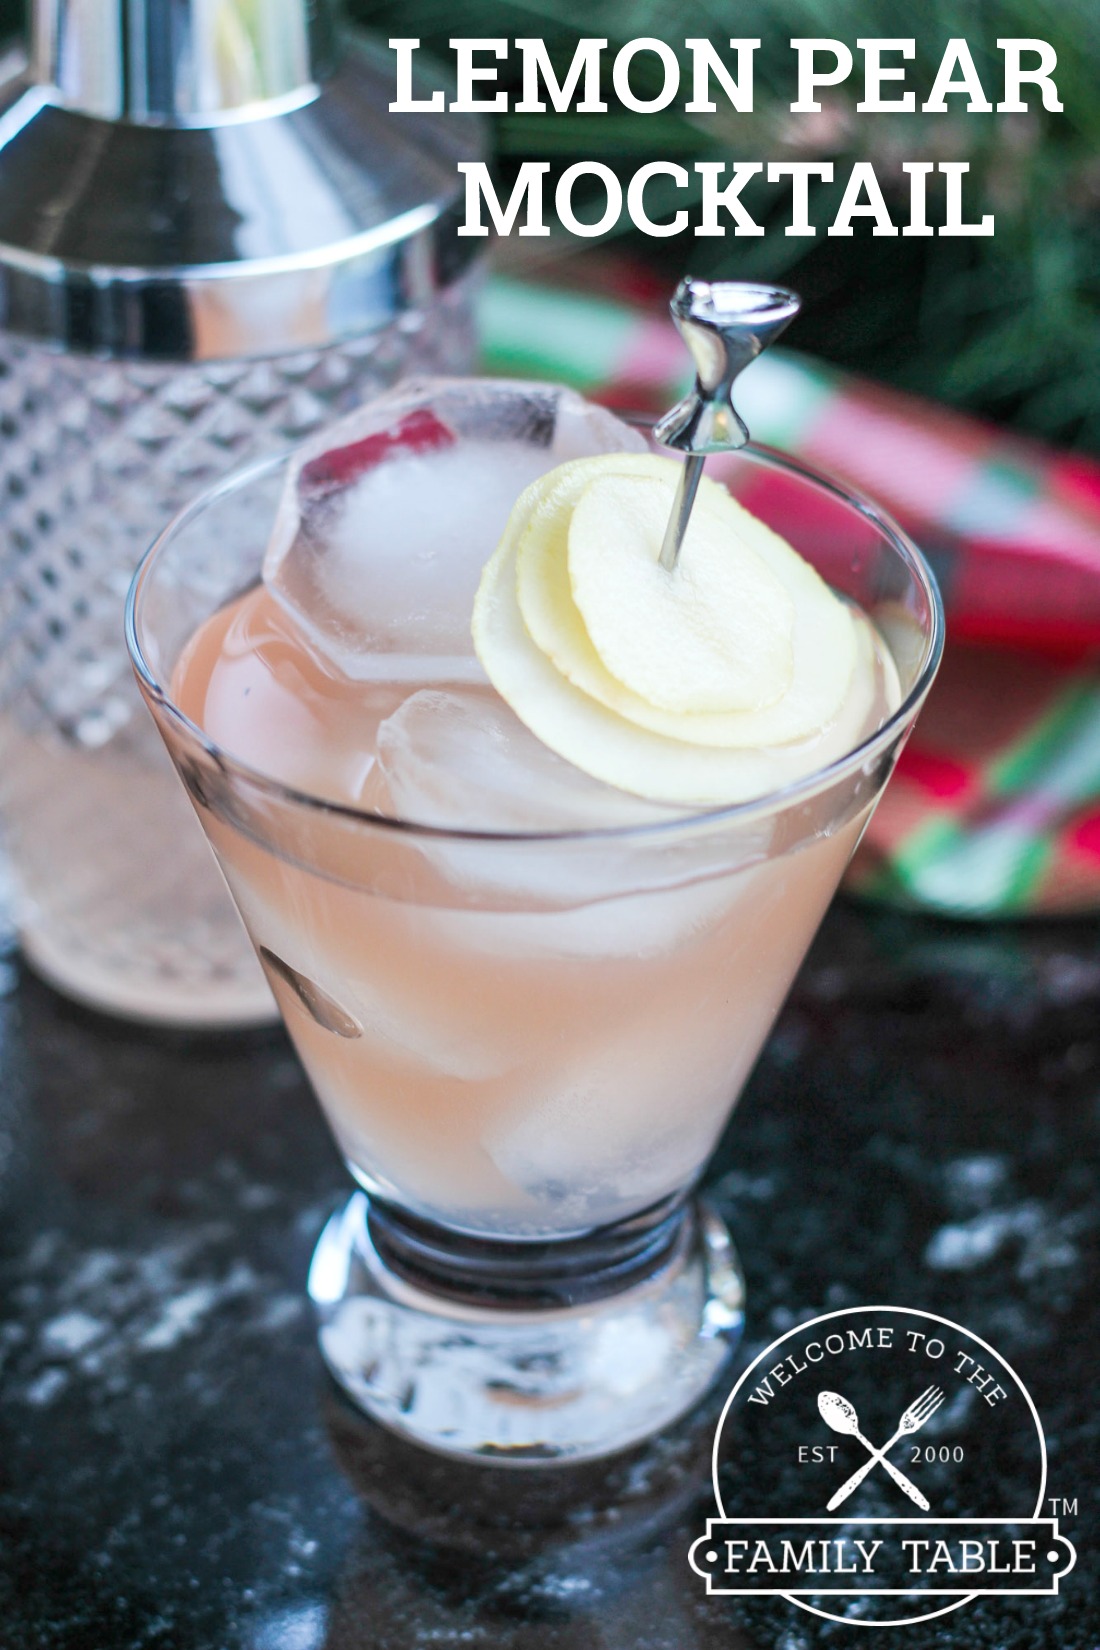 This Lemon Pear Mocktail Recipe is perfect for the family!